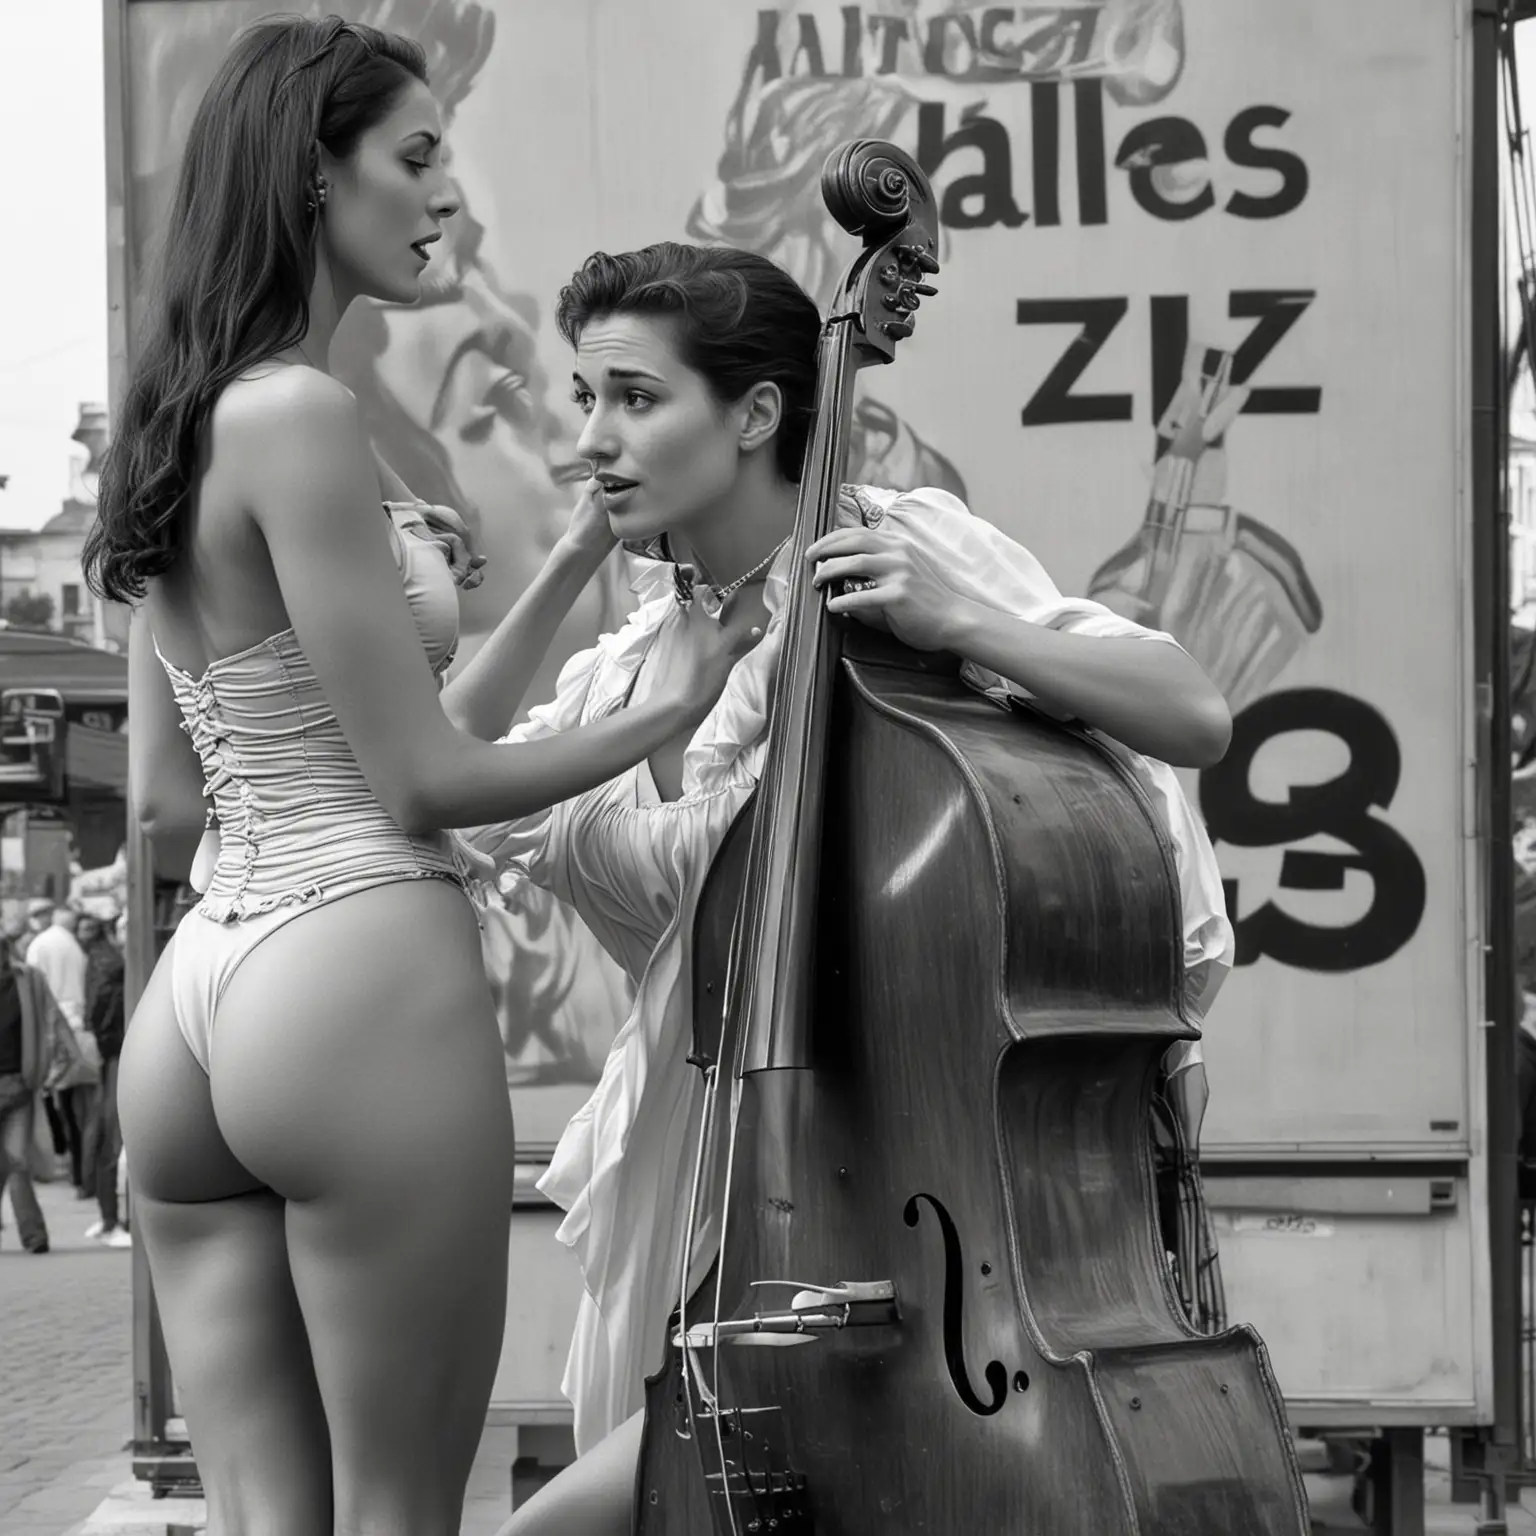 Sensual Italian Woman Playing Double Bass with Trumpet Player and Vintage Billboard